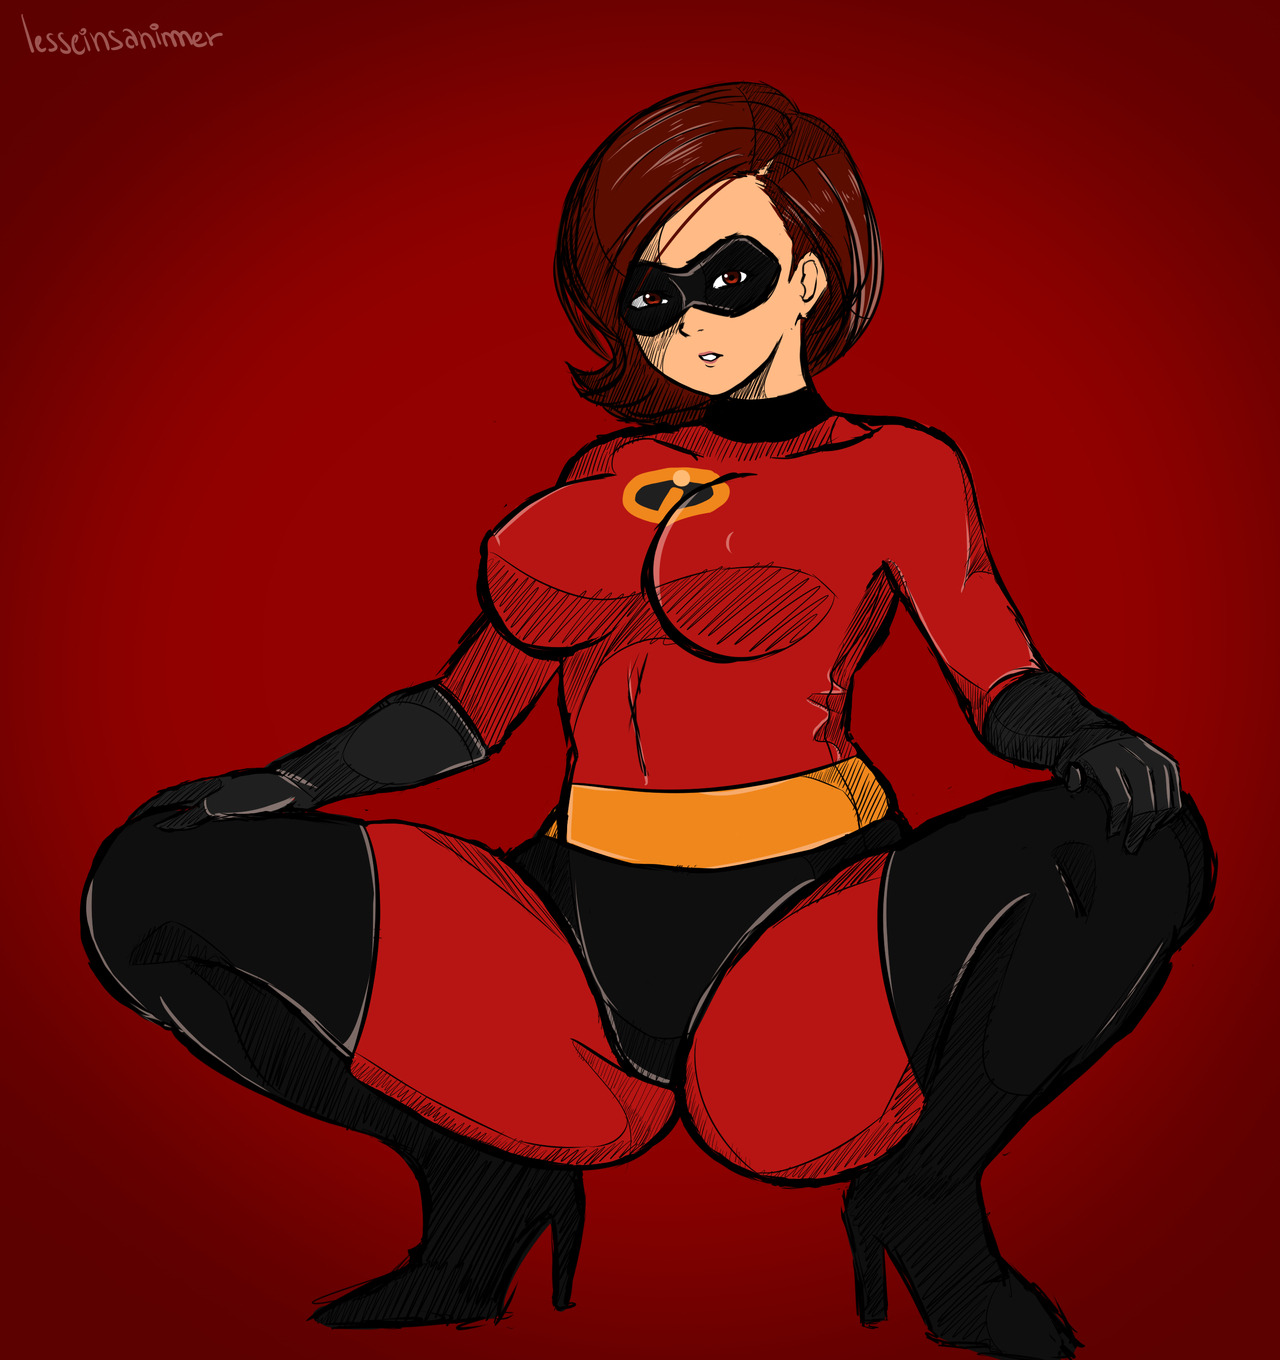 HELEN PARR 10 sketches patreon ecccsulisveHi guys, ive been working on some sketches